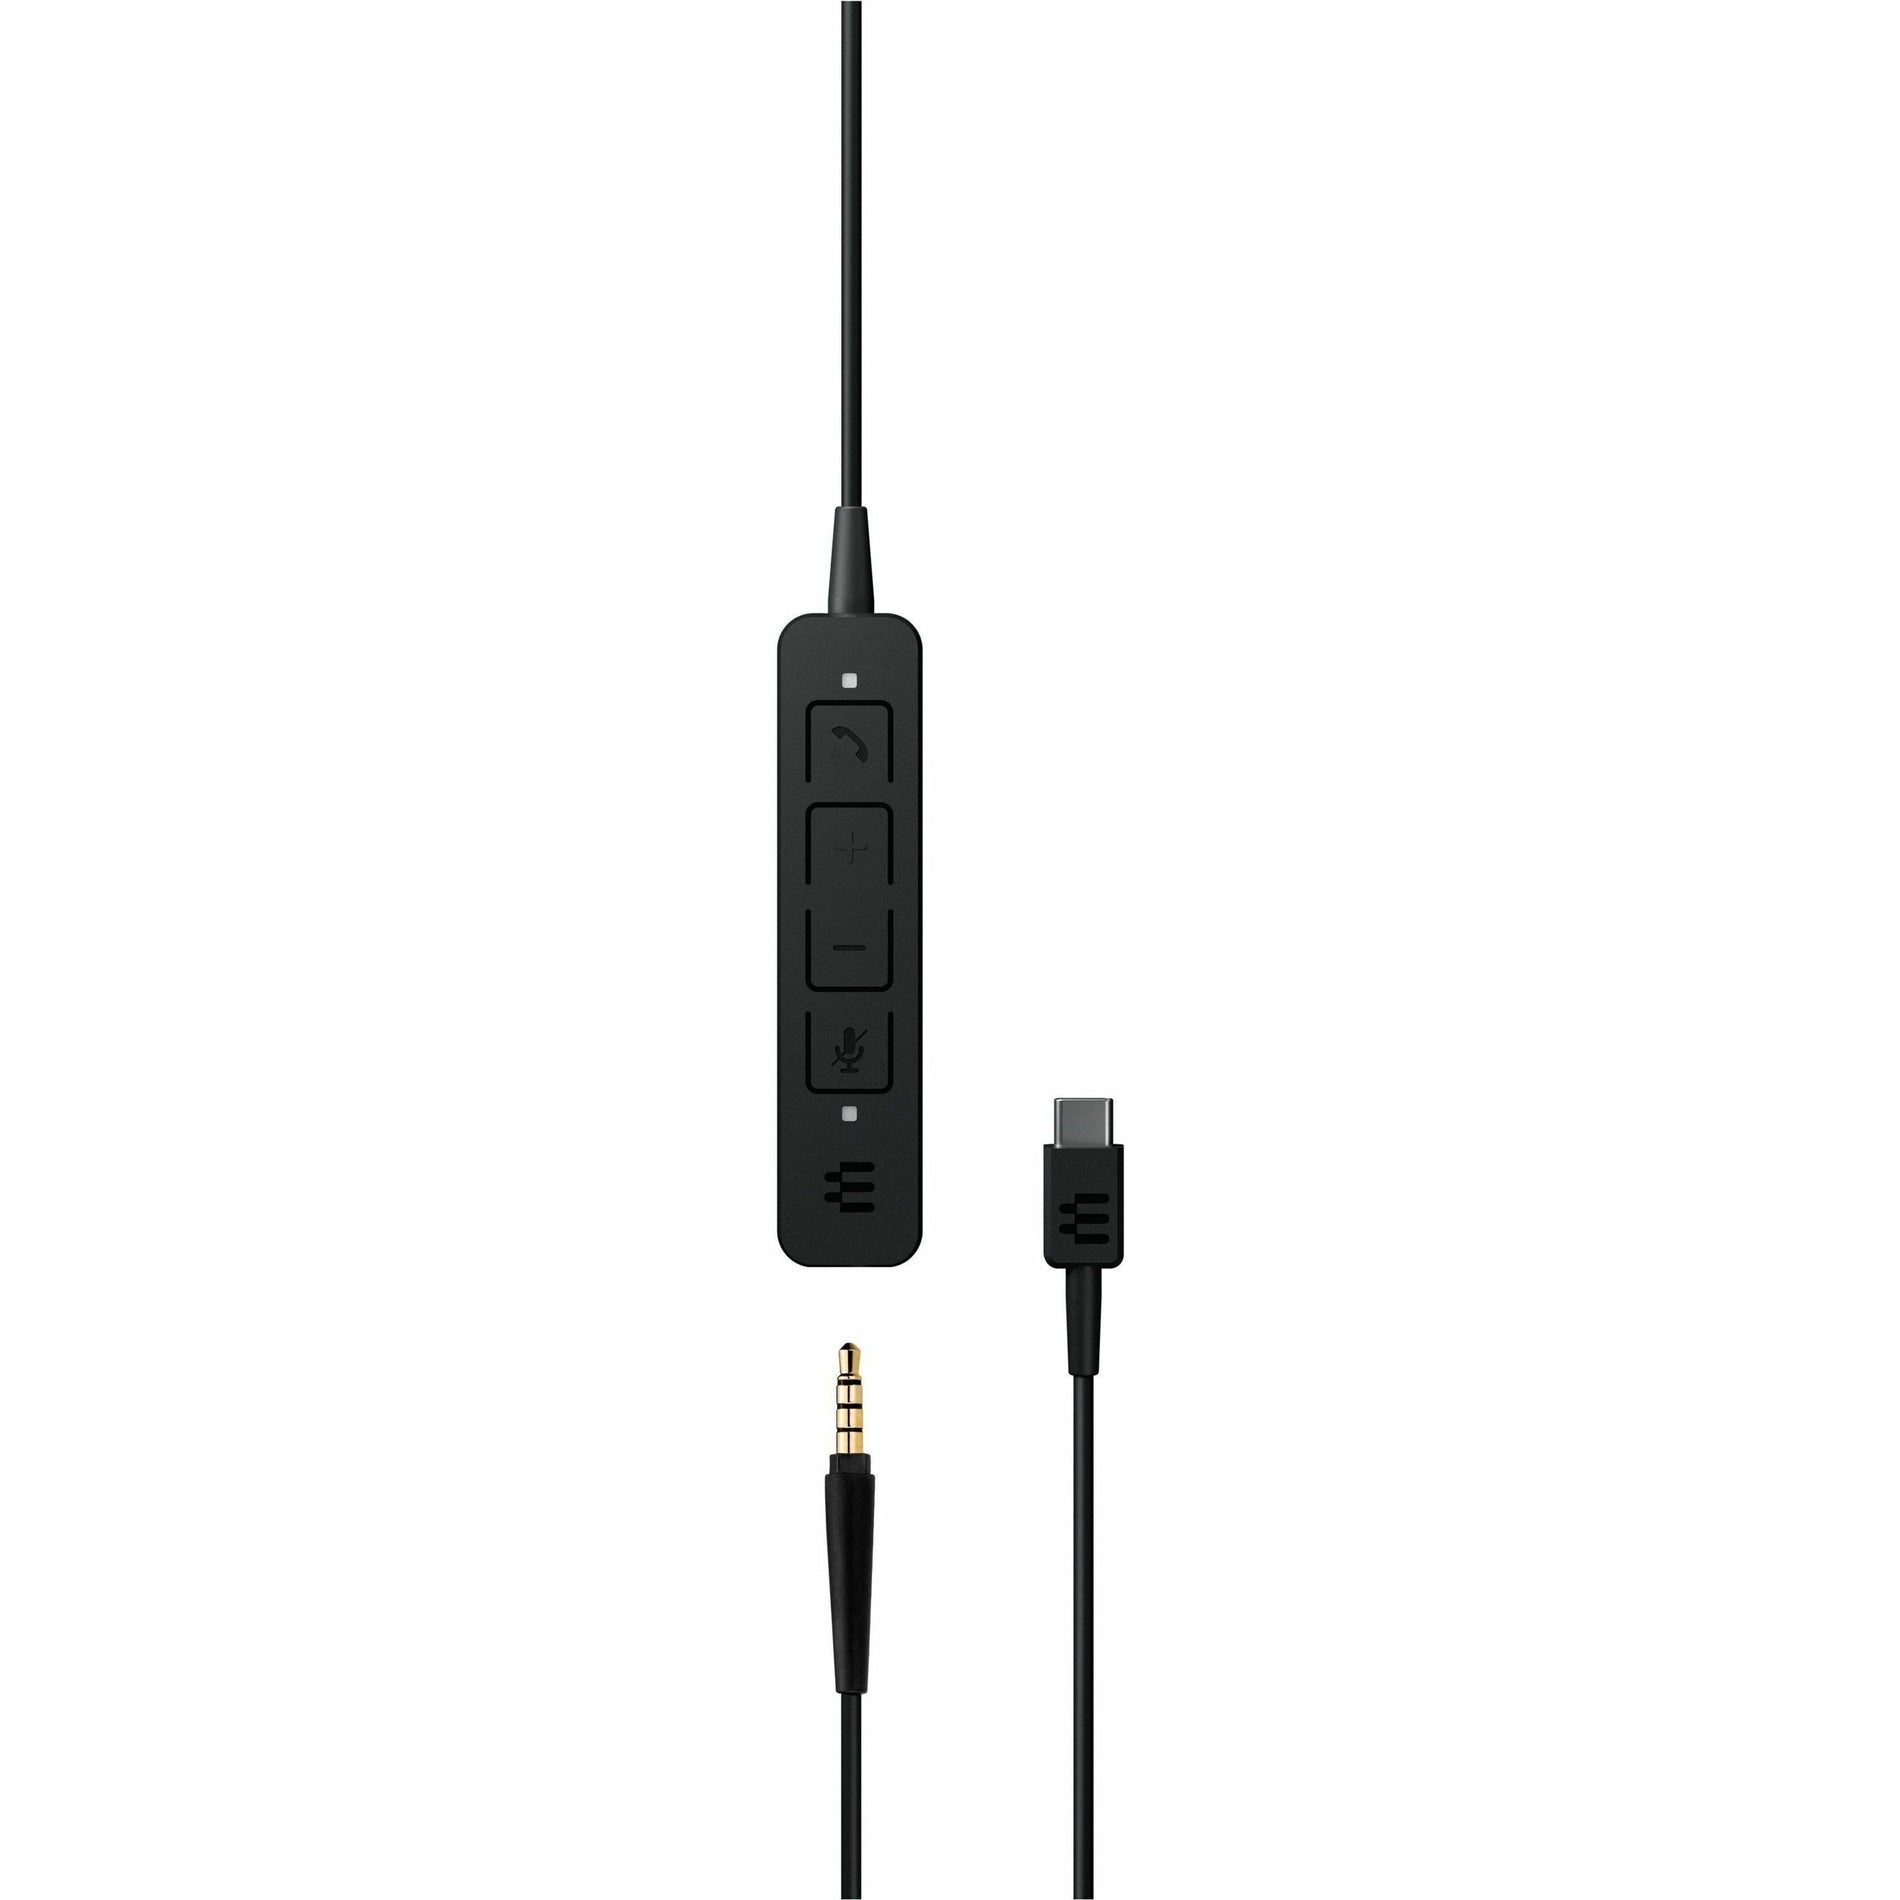 EPOS | SENNHEISER 1000920 ADAPT 165 USB-C II Headset, Binaural On-ear Headset with 2 Year Warranty, Integrated Microphone, Mobile Devices Compatibility